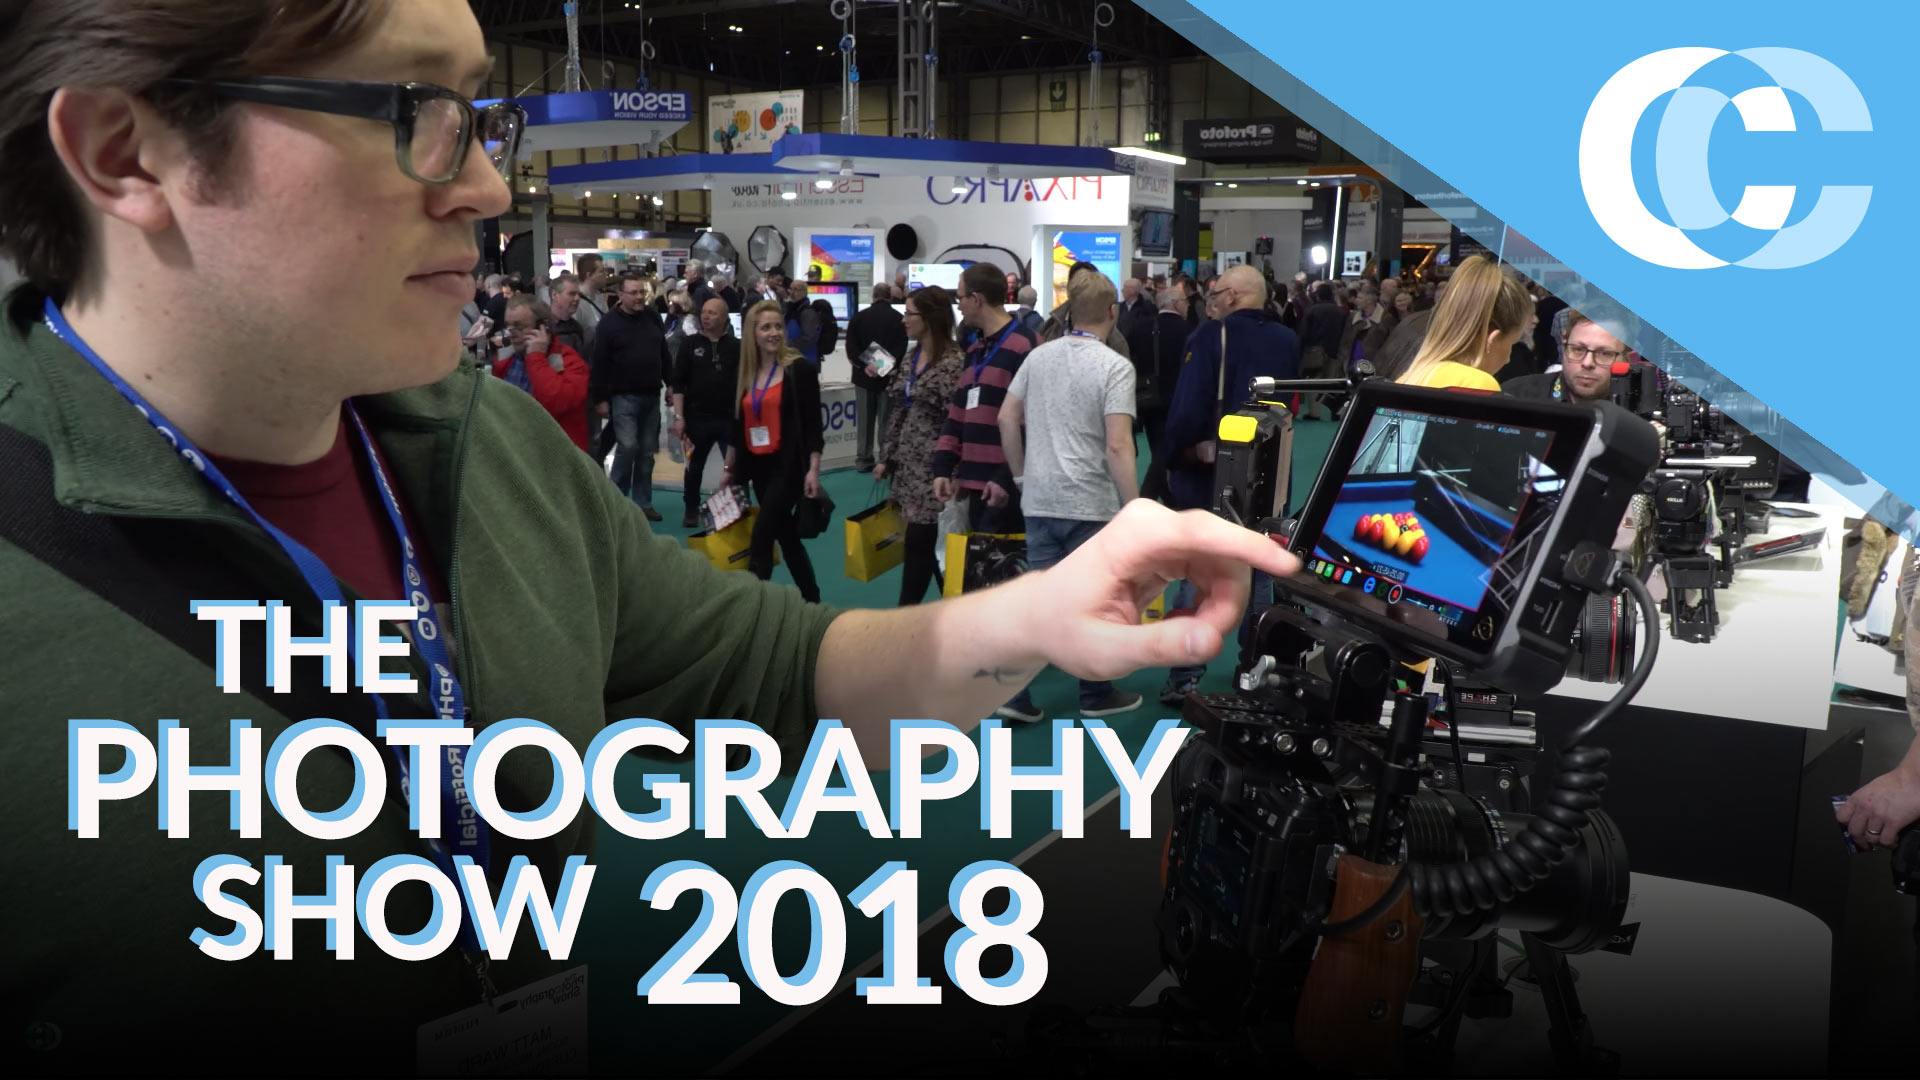 Is The Photography Show worth attending?